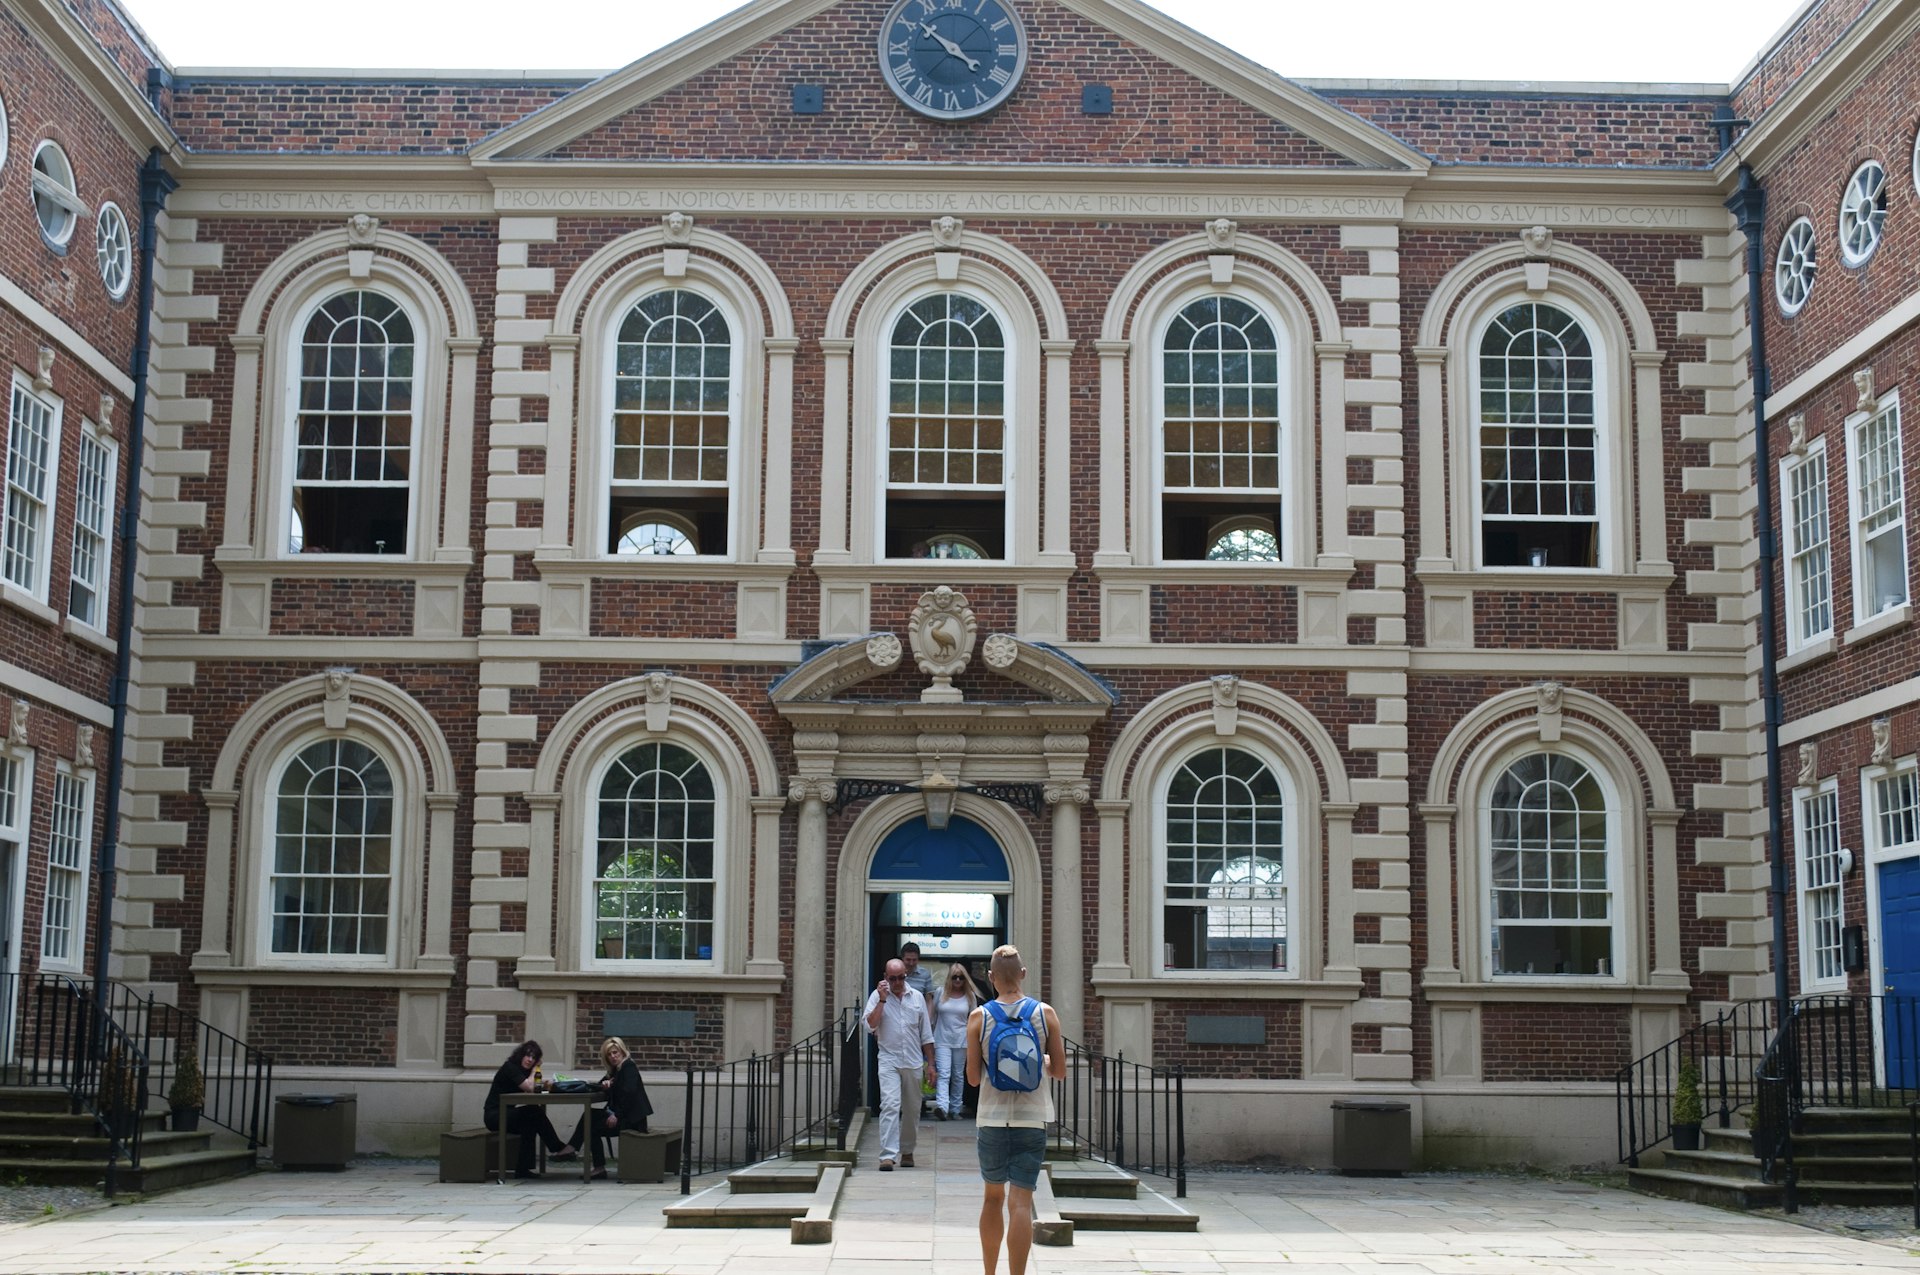 The frontage of the Bluecoat Chambers Arts Centre, Liverpool